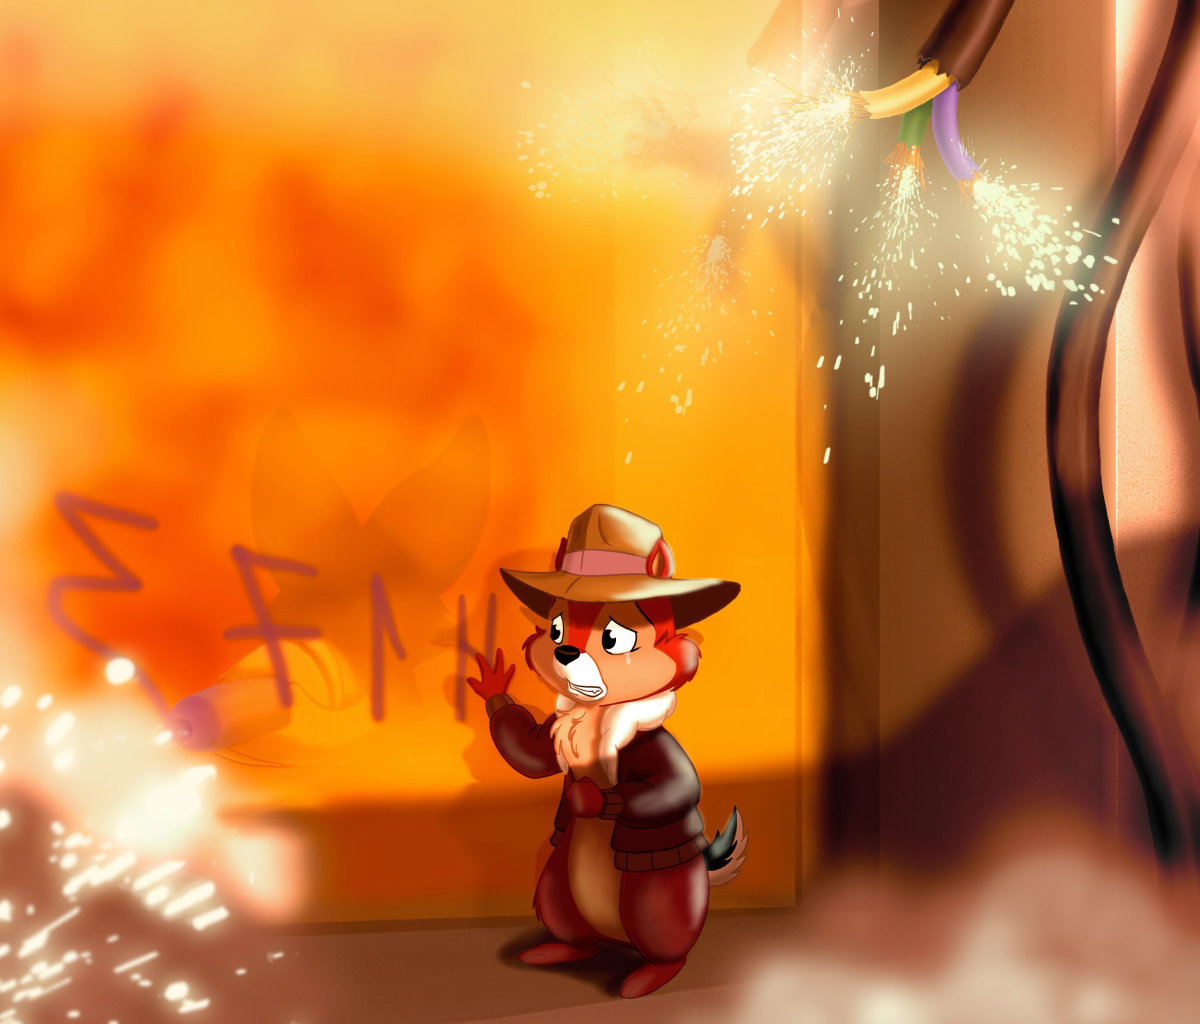 Das Chip and Dale Rescue Rangers 2 Wallpaper 1200x1024